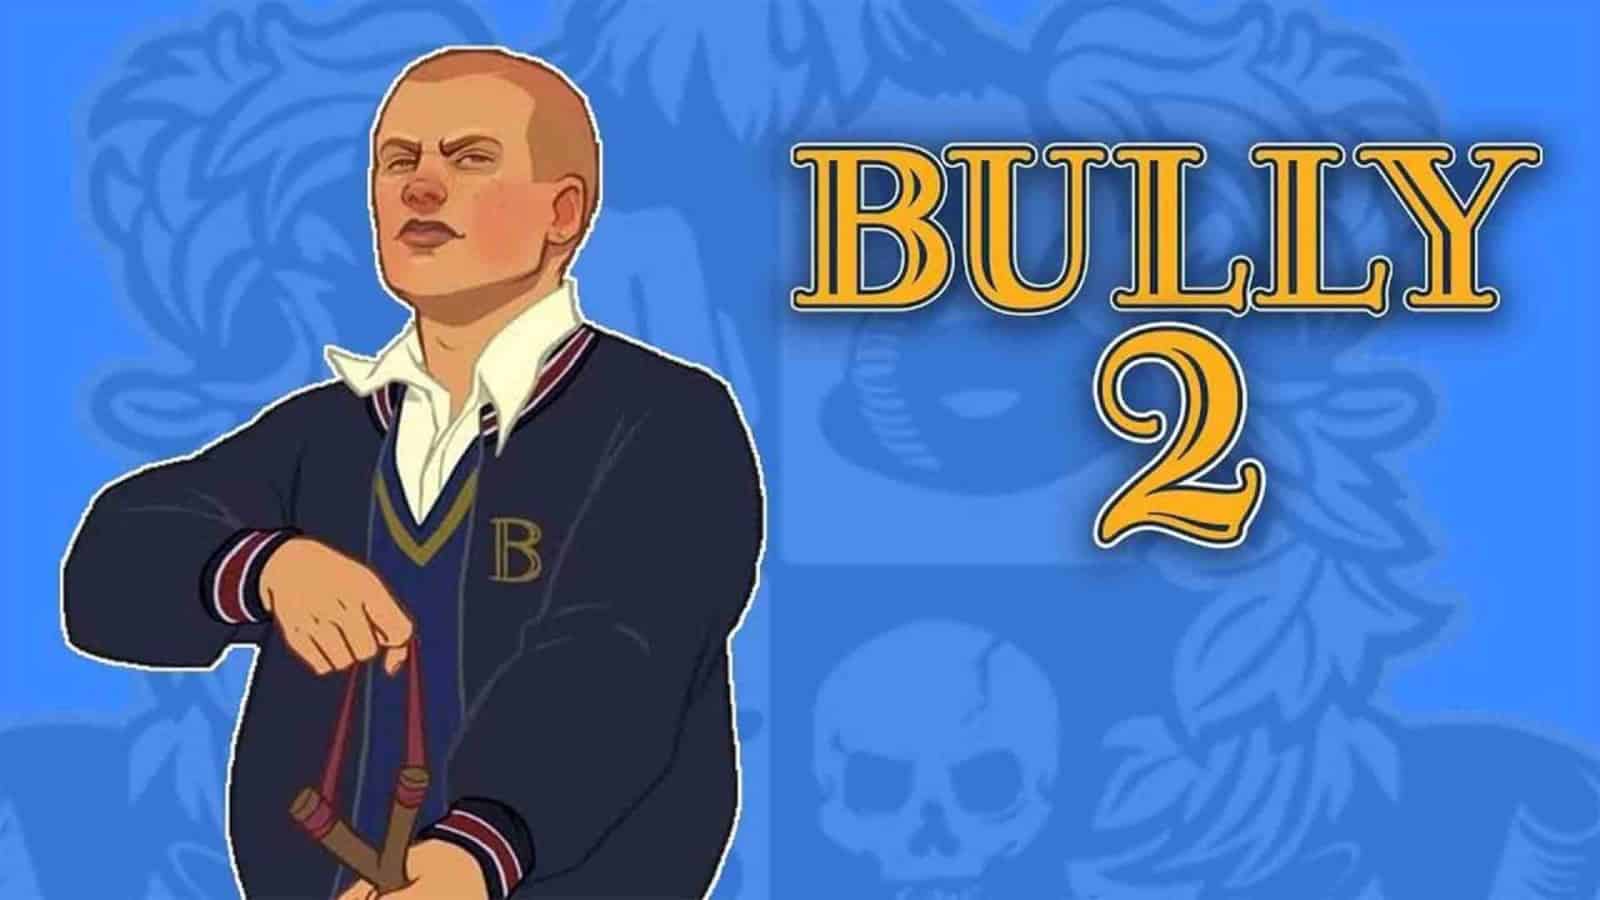 Bully protagonist Jimmy next to a logo for Bully 2